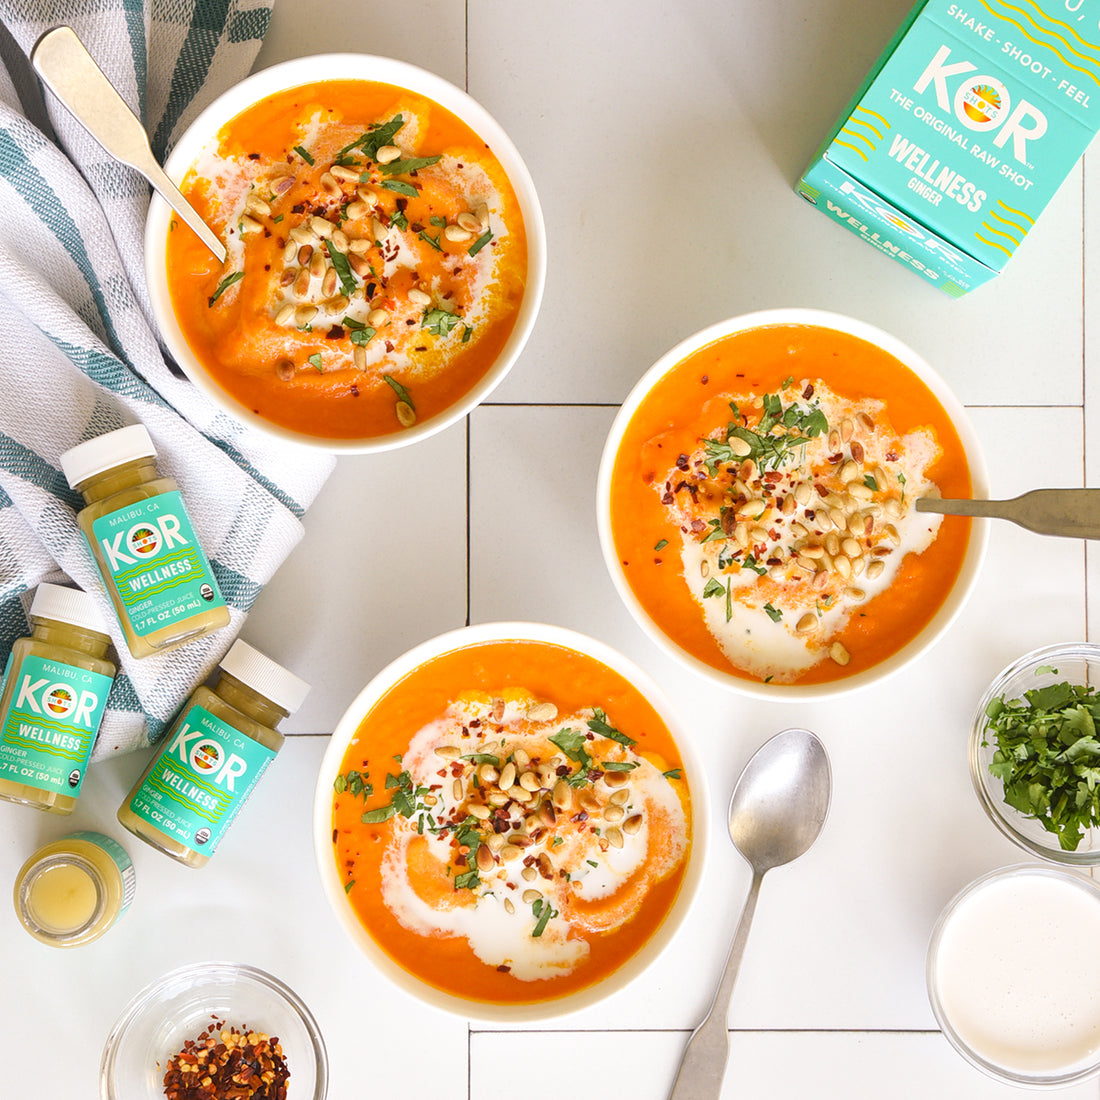 carrot ginger soup in bowls on white kitchen counter with kor shots wellness